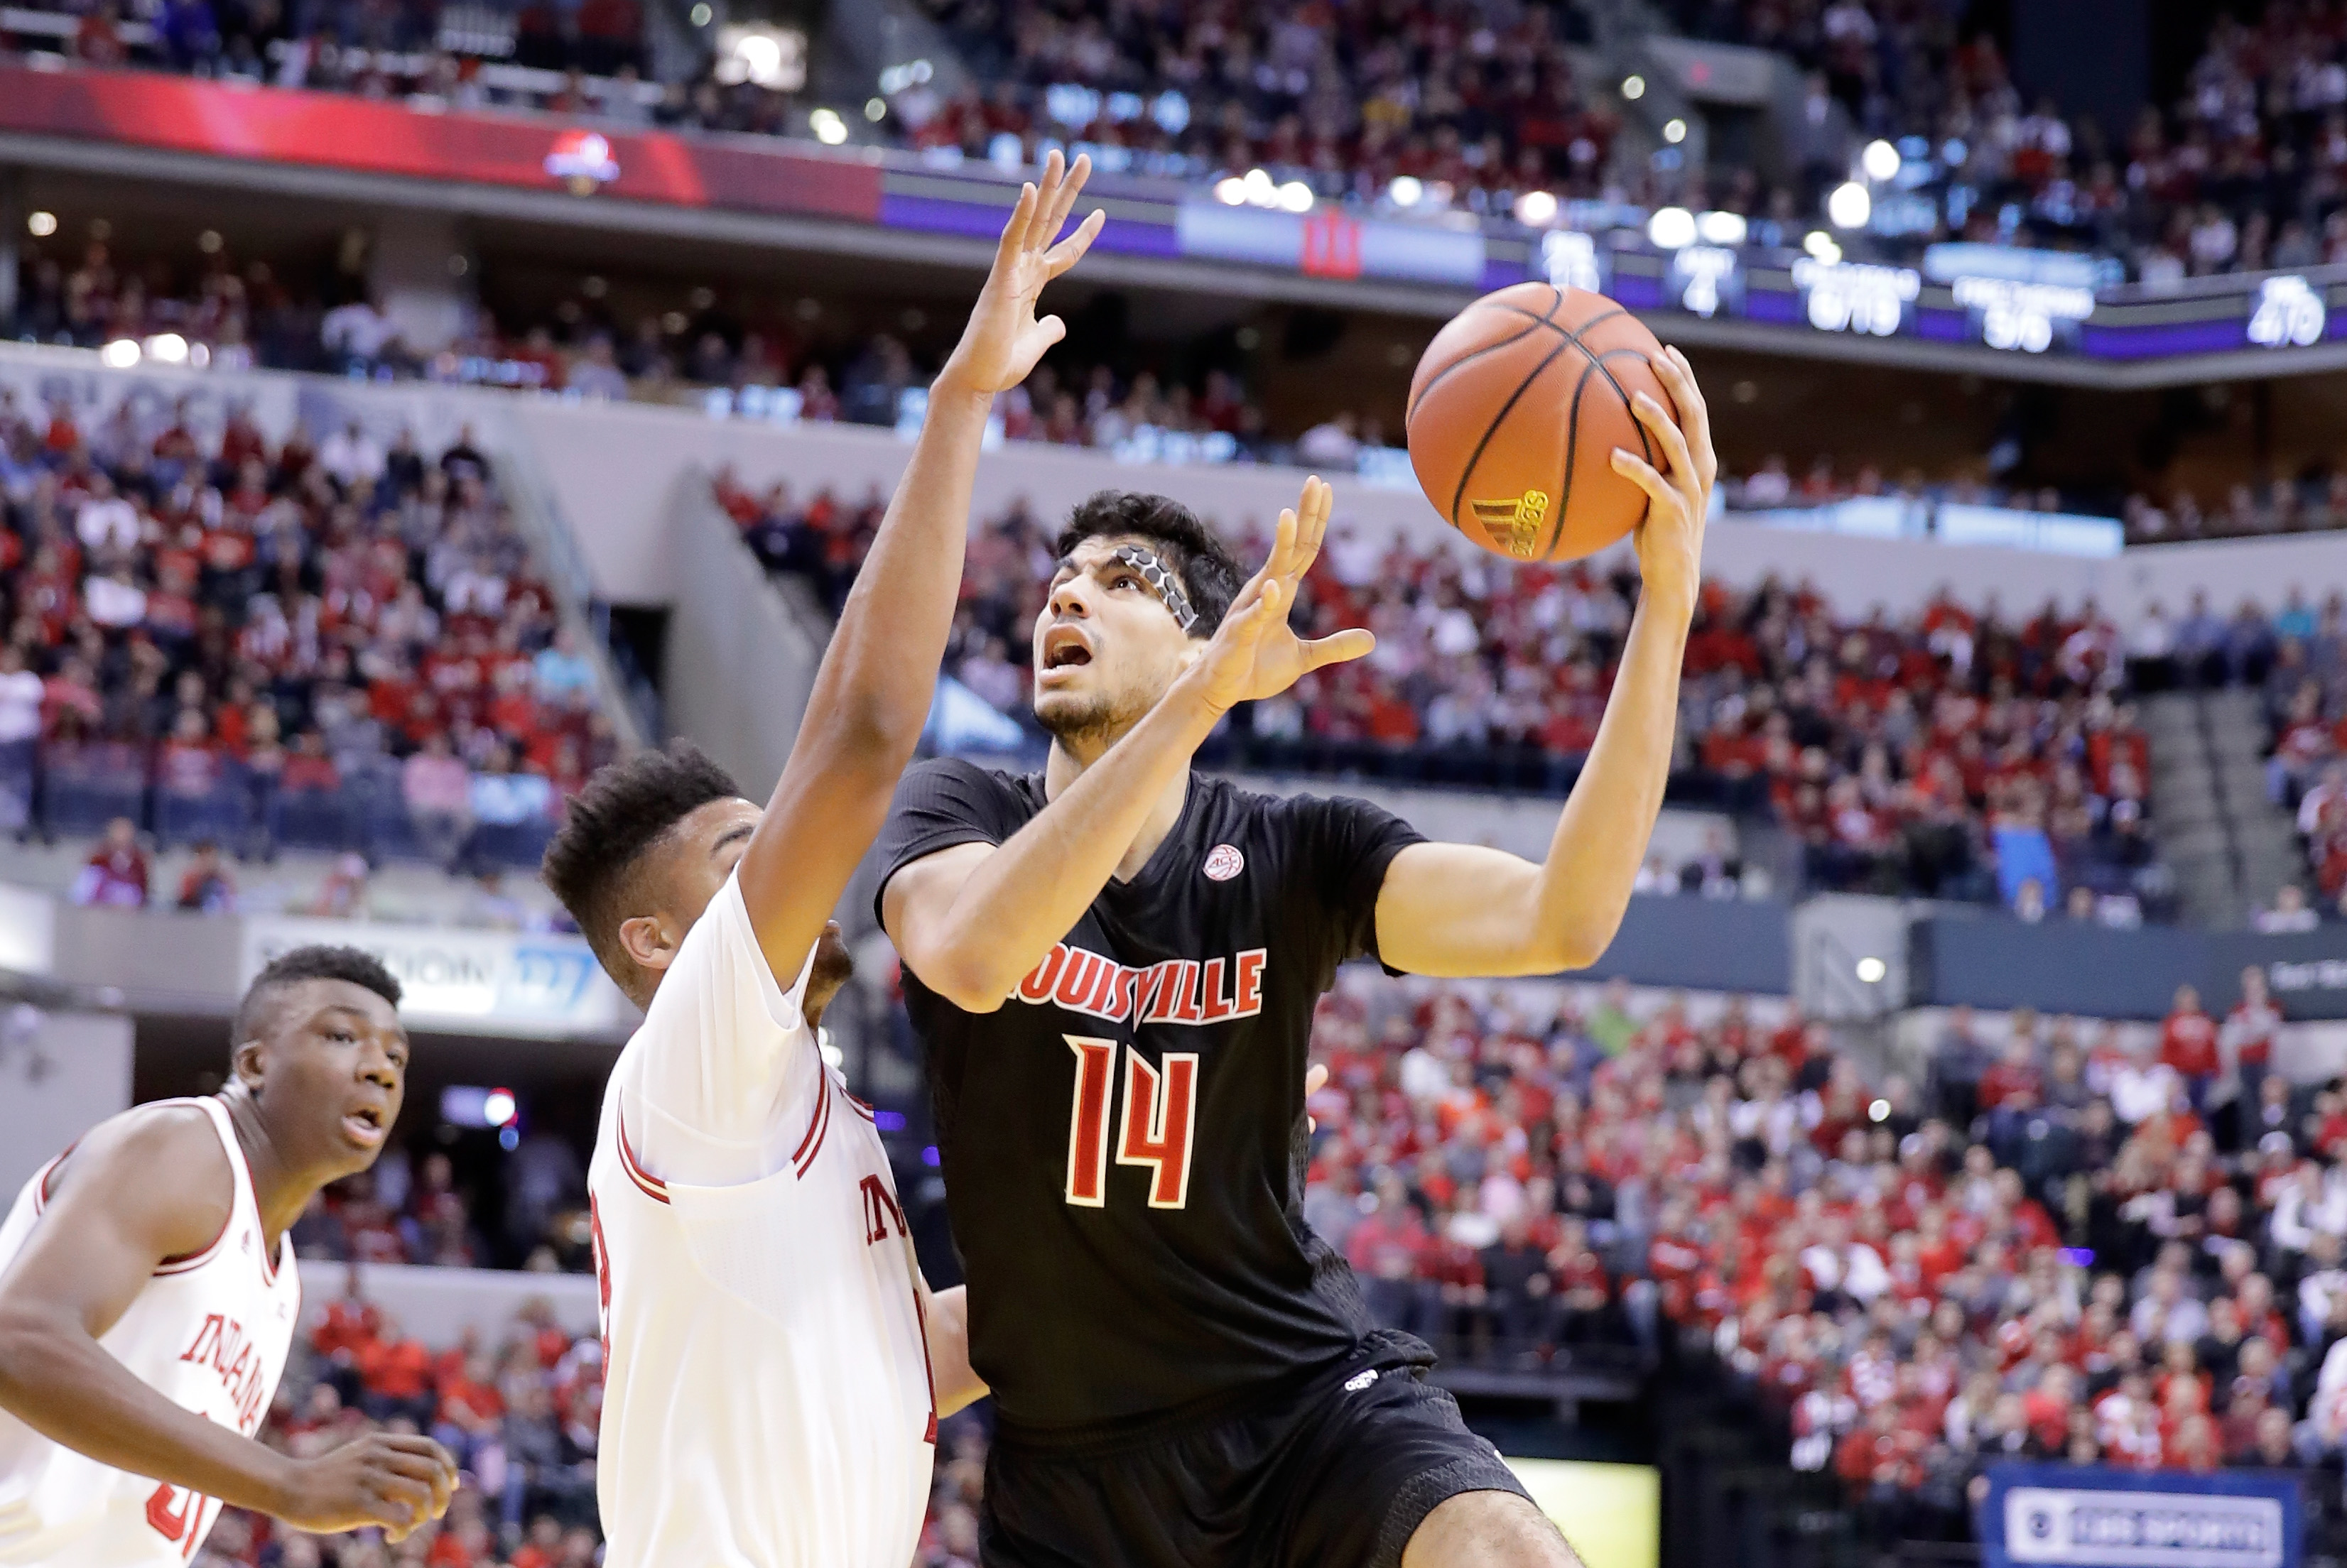 INDIANAPOLIS, IN - DECEMBER 31: Anas Mahmoud #14 of the Louisville Cardinals shoots the ball during the game against the Indiana Hoosiers in the Countdown Classic at Bankers Life Fieldhouse on December 31, 2016 in Indianapolis, Indiana. (Photo by Andy Lyons/Getty Images)